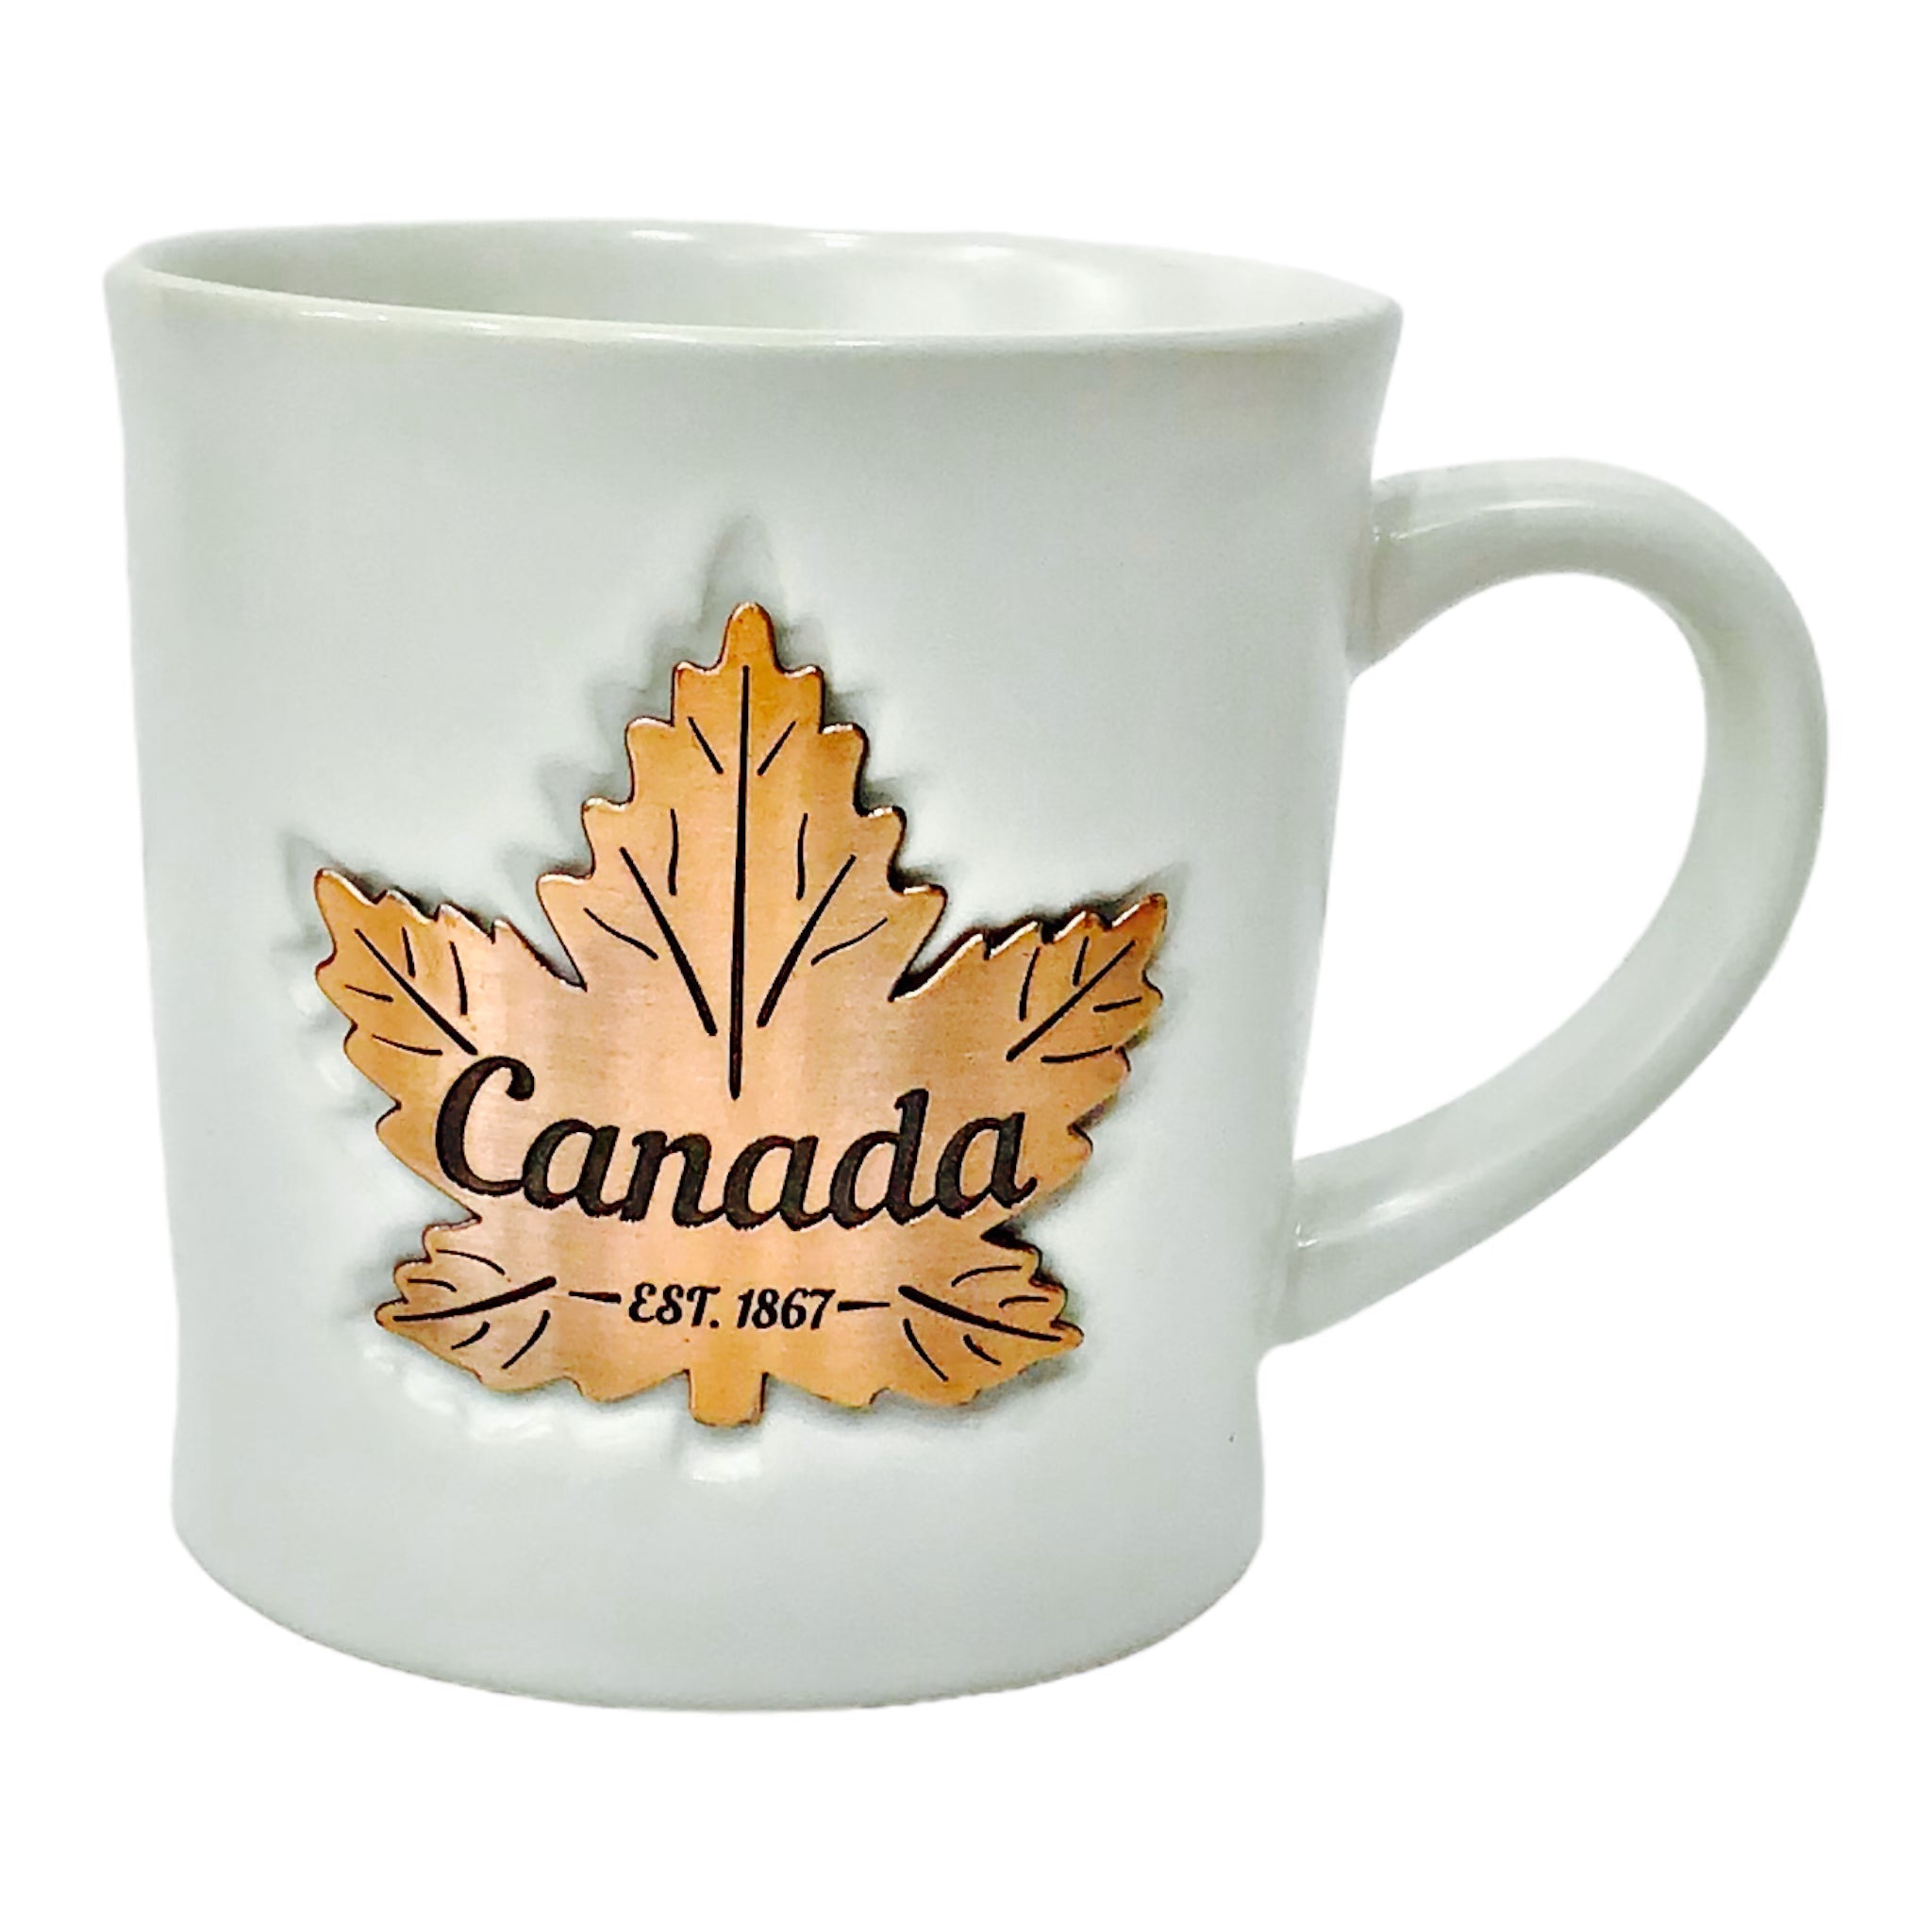 CANADA COPPER PLATE MAPLE LEAF Mug - Embossed 3D Metal Maple Leaf Themed Design - Large 18oz Coffee Cup